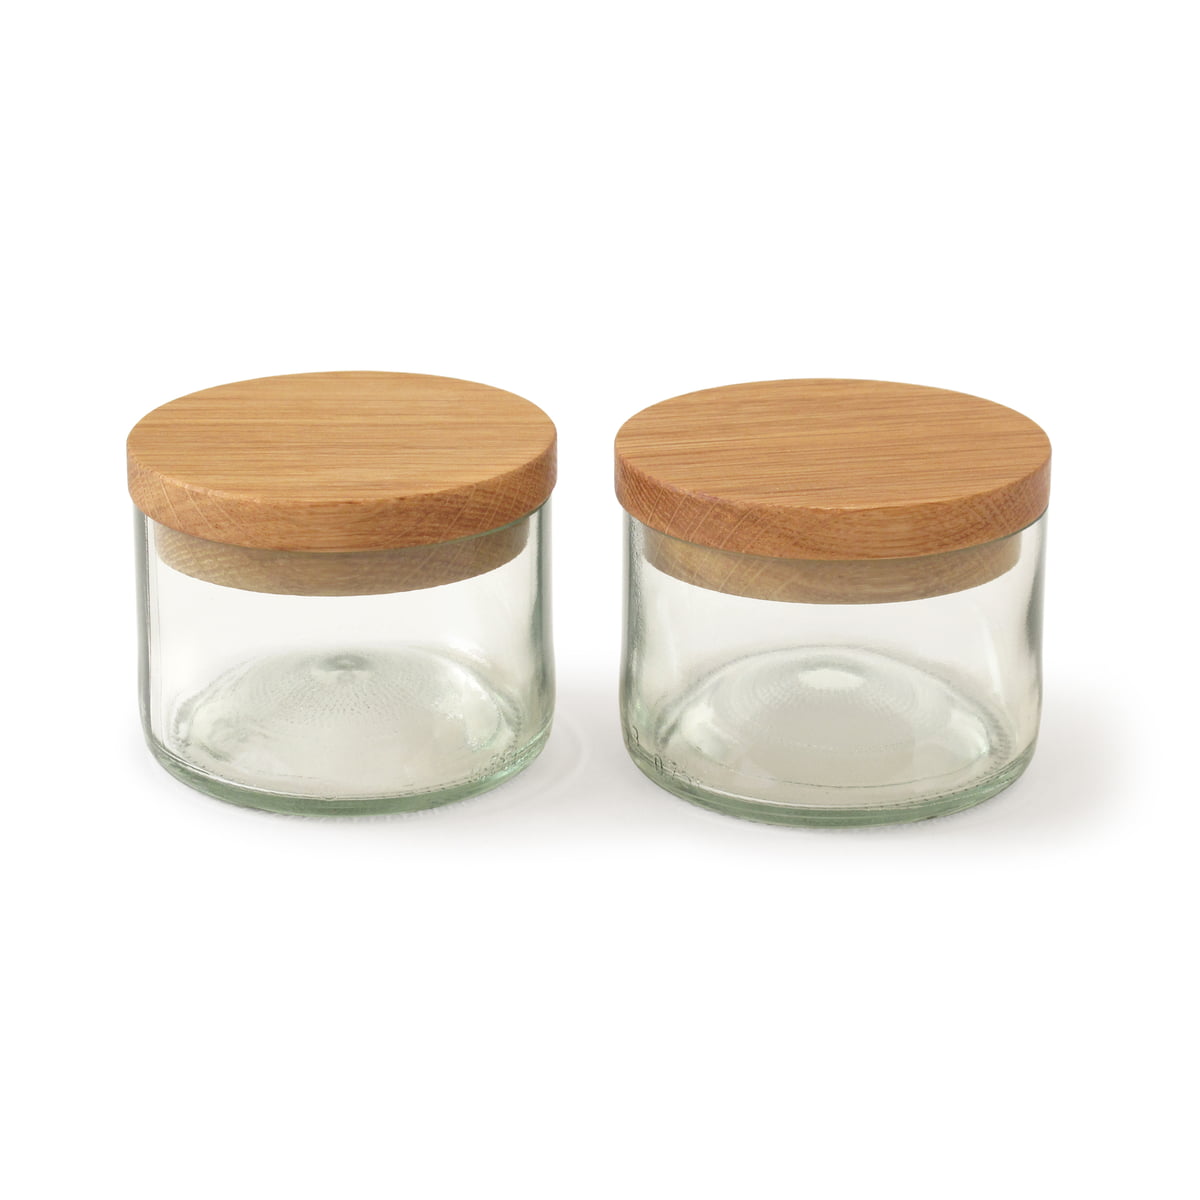 Spice Jars With Labels / Glass Jar With Label / Spice Canister With Label / Spice  Jars With Bamboo Lid / 250ml Jars With Labels 